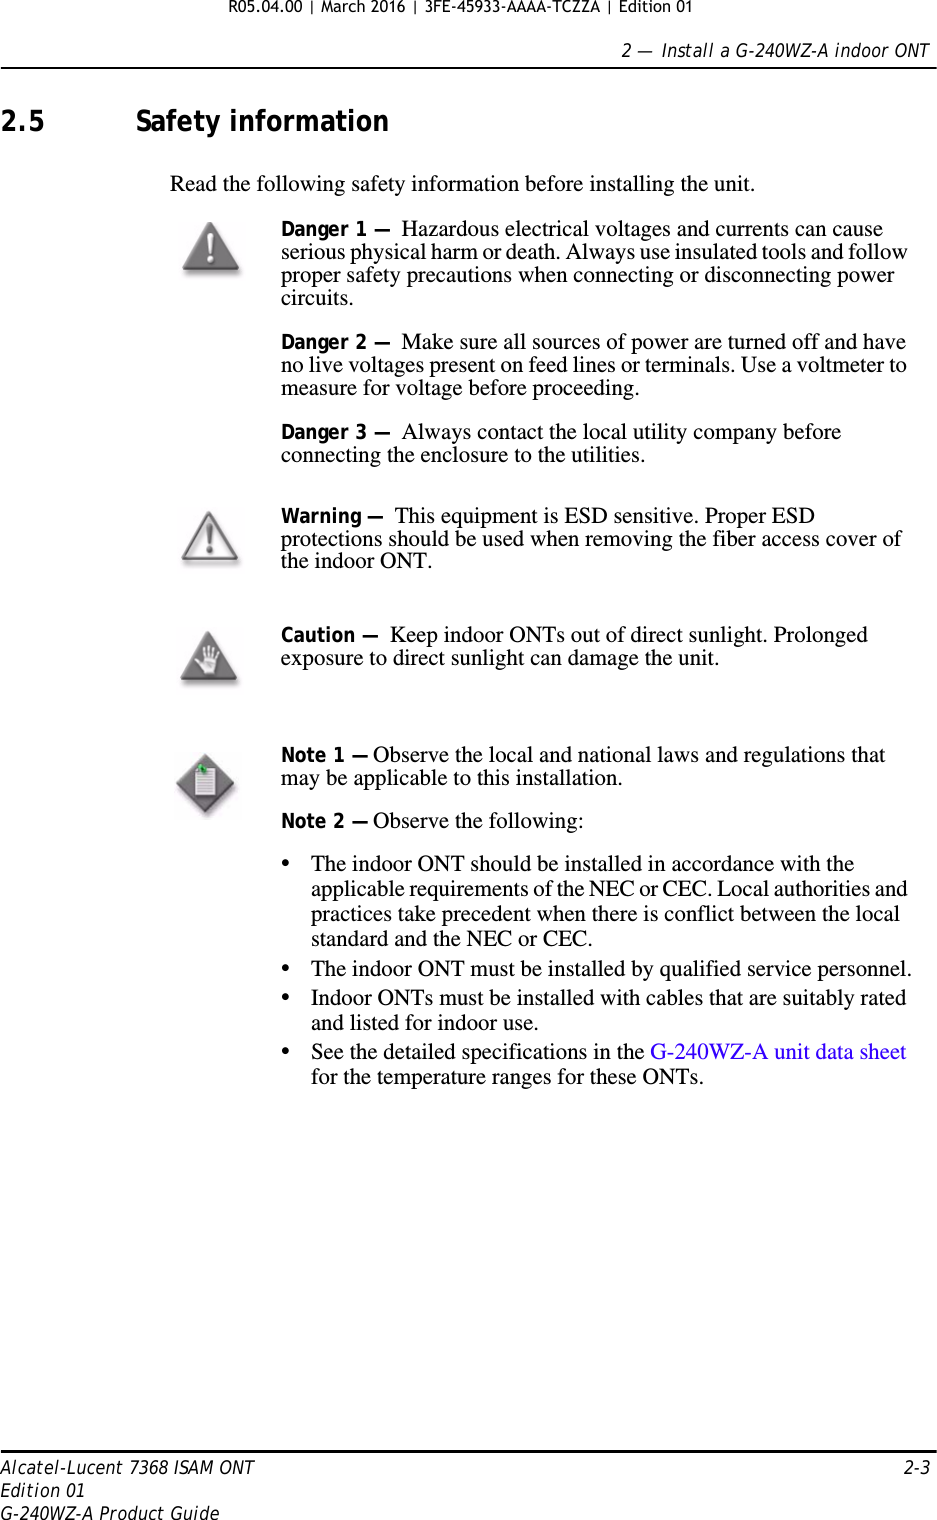 2 —  Install a G-240WZ-A indoor ONTAlcatel-Lucent 7368 ISAM ONT 2-3Edition 01G-240WZ-A Product Guide2.5 Safety informationRead the following safety information before installing the unit. Danger 1 —  Hazardous electrical voltages and currents can cause serious physical harm or death. Always use insulated tools and follow proper safety precautions when connecting or disconnecting power circuits. Danger 2 —  Make sure all sources of power are turned off and have no live voltages present on feed lines or terminals. Use a voltmeter to measure for voltage before proceeding.Danger 3 —  Always contact the local utility company before connecting the enclosure to the utilities.Warning —  This equipment is ESD sensitive. Proper ESD protections should be used when removing the fiber access cover of the indoor ONT.Caution —  Keep indoor ONTs out of direct sunlight. Prolonged exposure to direct sunlight can damage the unit.Note 1 — Observe the local and national laws and regulations that may be applicable to this installation.Note 2 — Observe the following:•The indoor ONT should be installed in accordance with the applicable requirements of the NEC or CEC. Local authorities and practices take precedent when there is conflict between the local standard and the NEC or CEC. •The indoor ONT must be installed by qualified service personnel.•Indoor ONTs must be installed with cables that are suitably rated and listed for indoor use.•See the detailed specifications in the G-240WZ-A unit data sheet for the temperature ranges for these ONTs. R05.04.00 | March 2016 | 3FE-45933-AAAA-TCZZA | Edition 01 